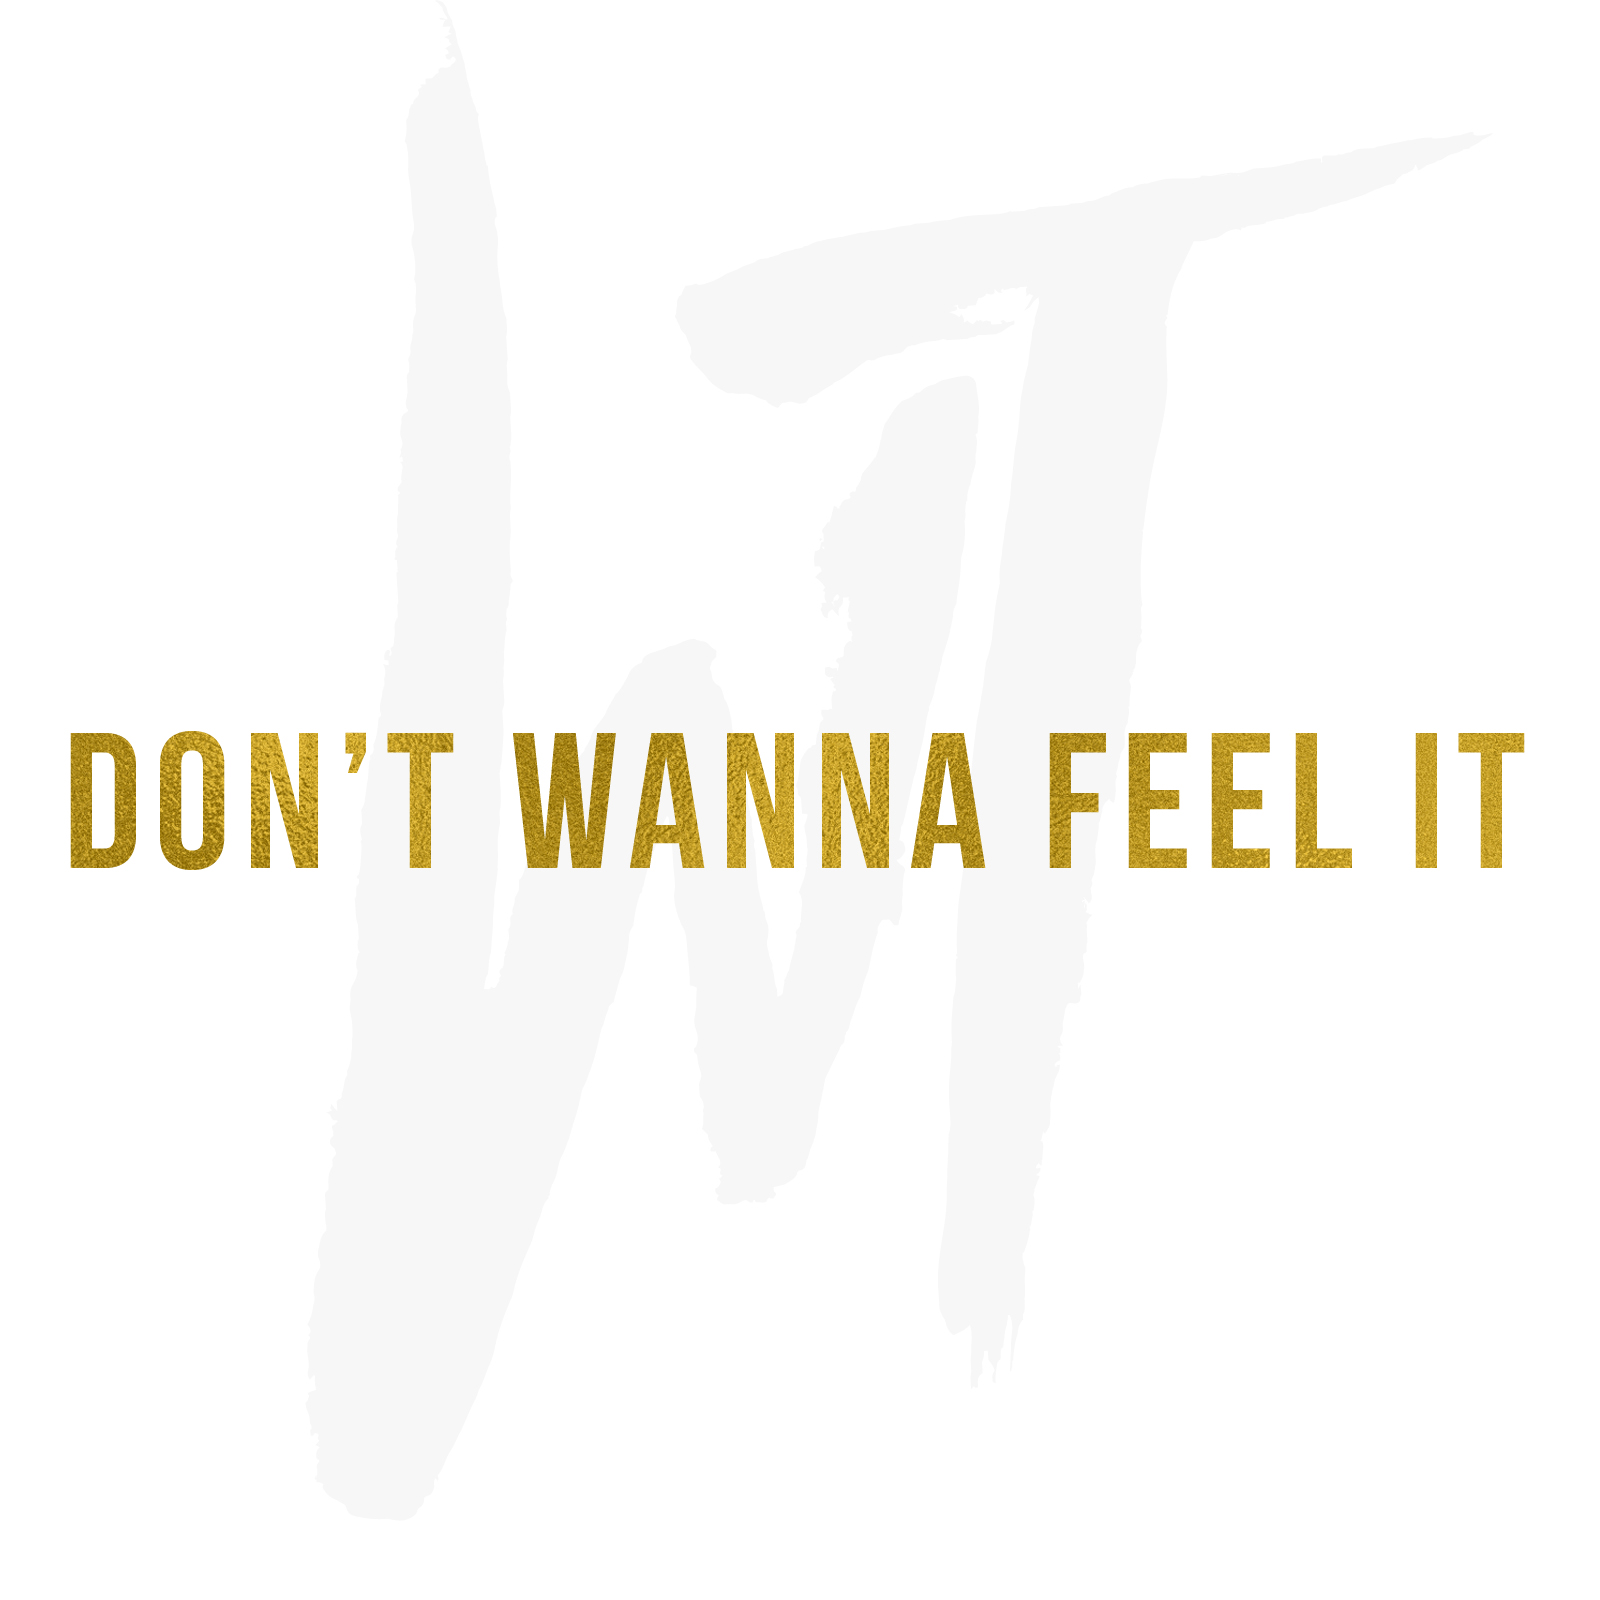 Wild Things Return with “Don’t Wanna Feel It”